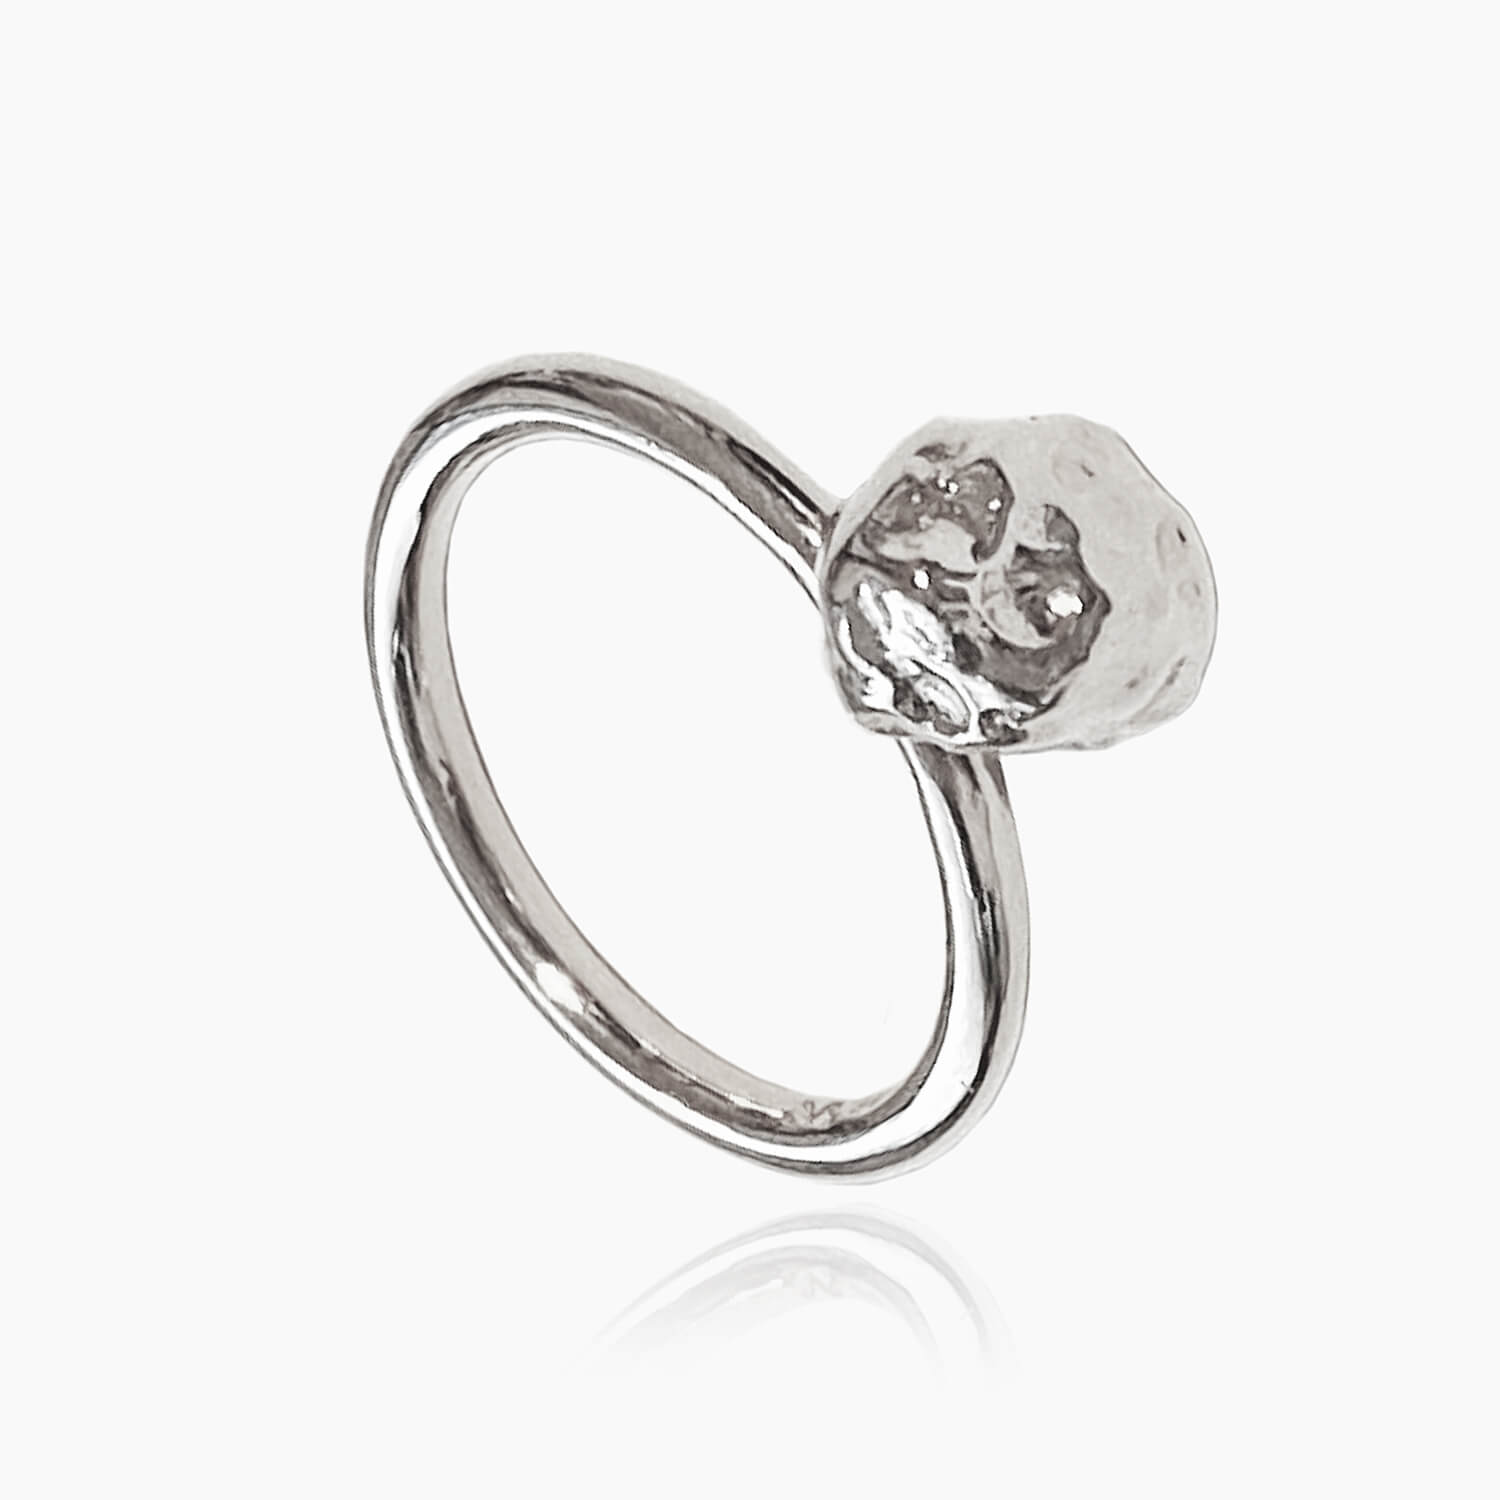 Charm ring with thin band and large silver charm